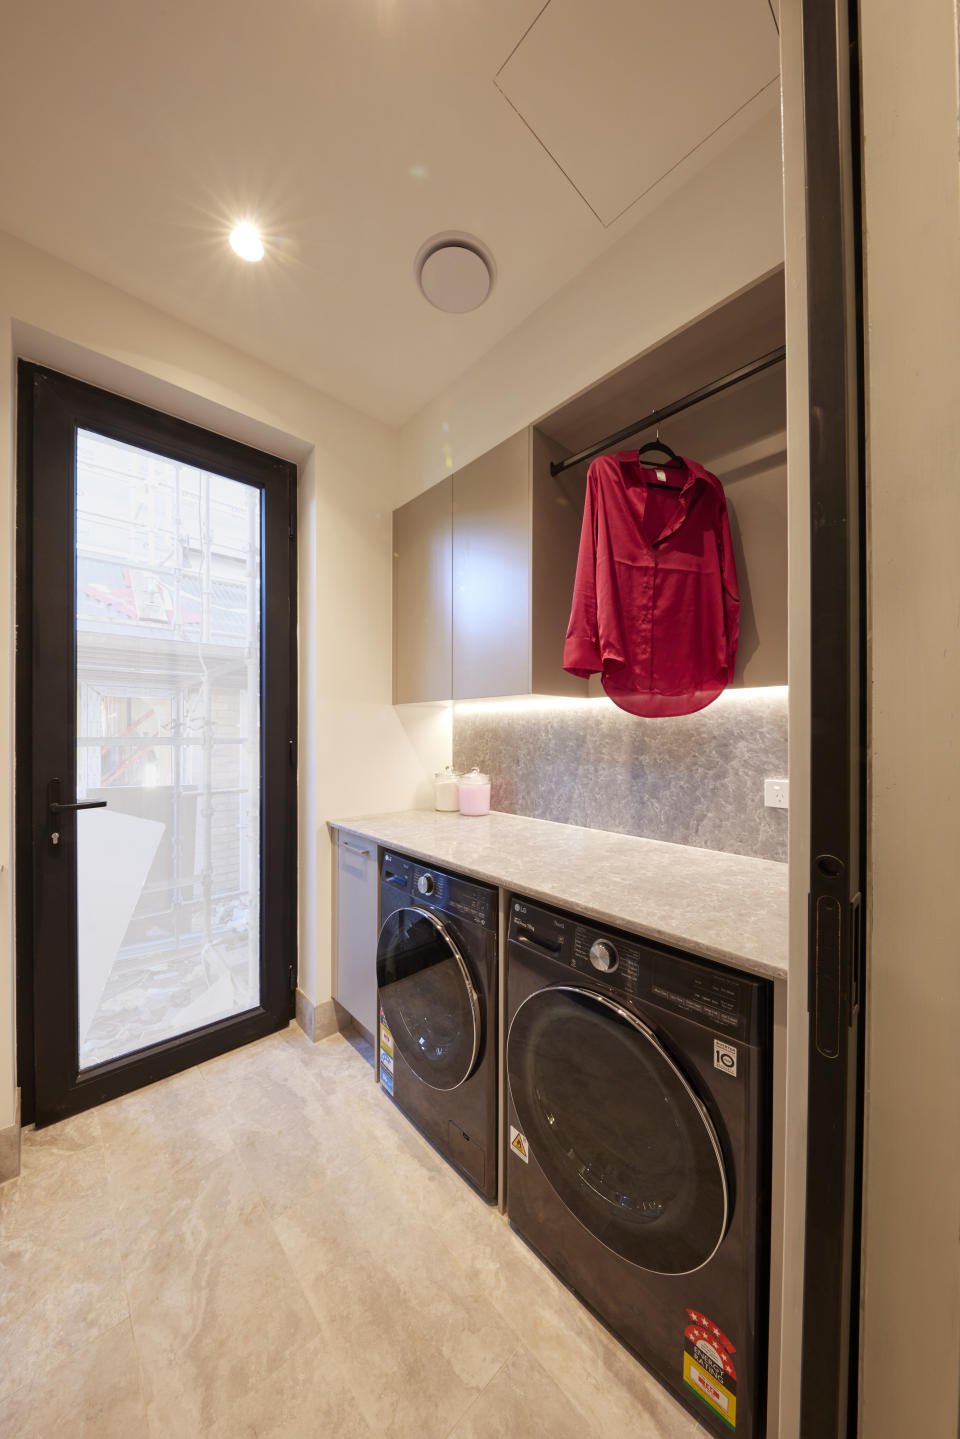 A photo of a washer and dryer with bench space above them and a hanging red button up shirt.